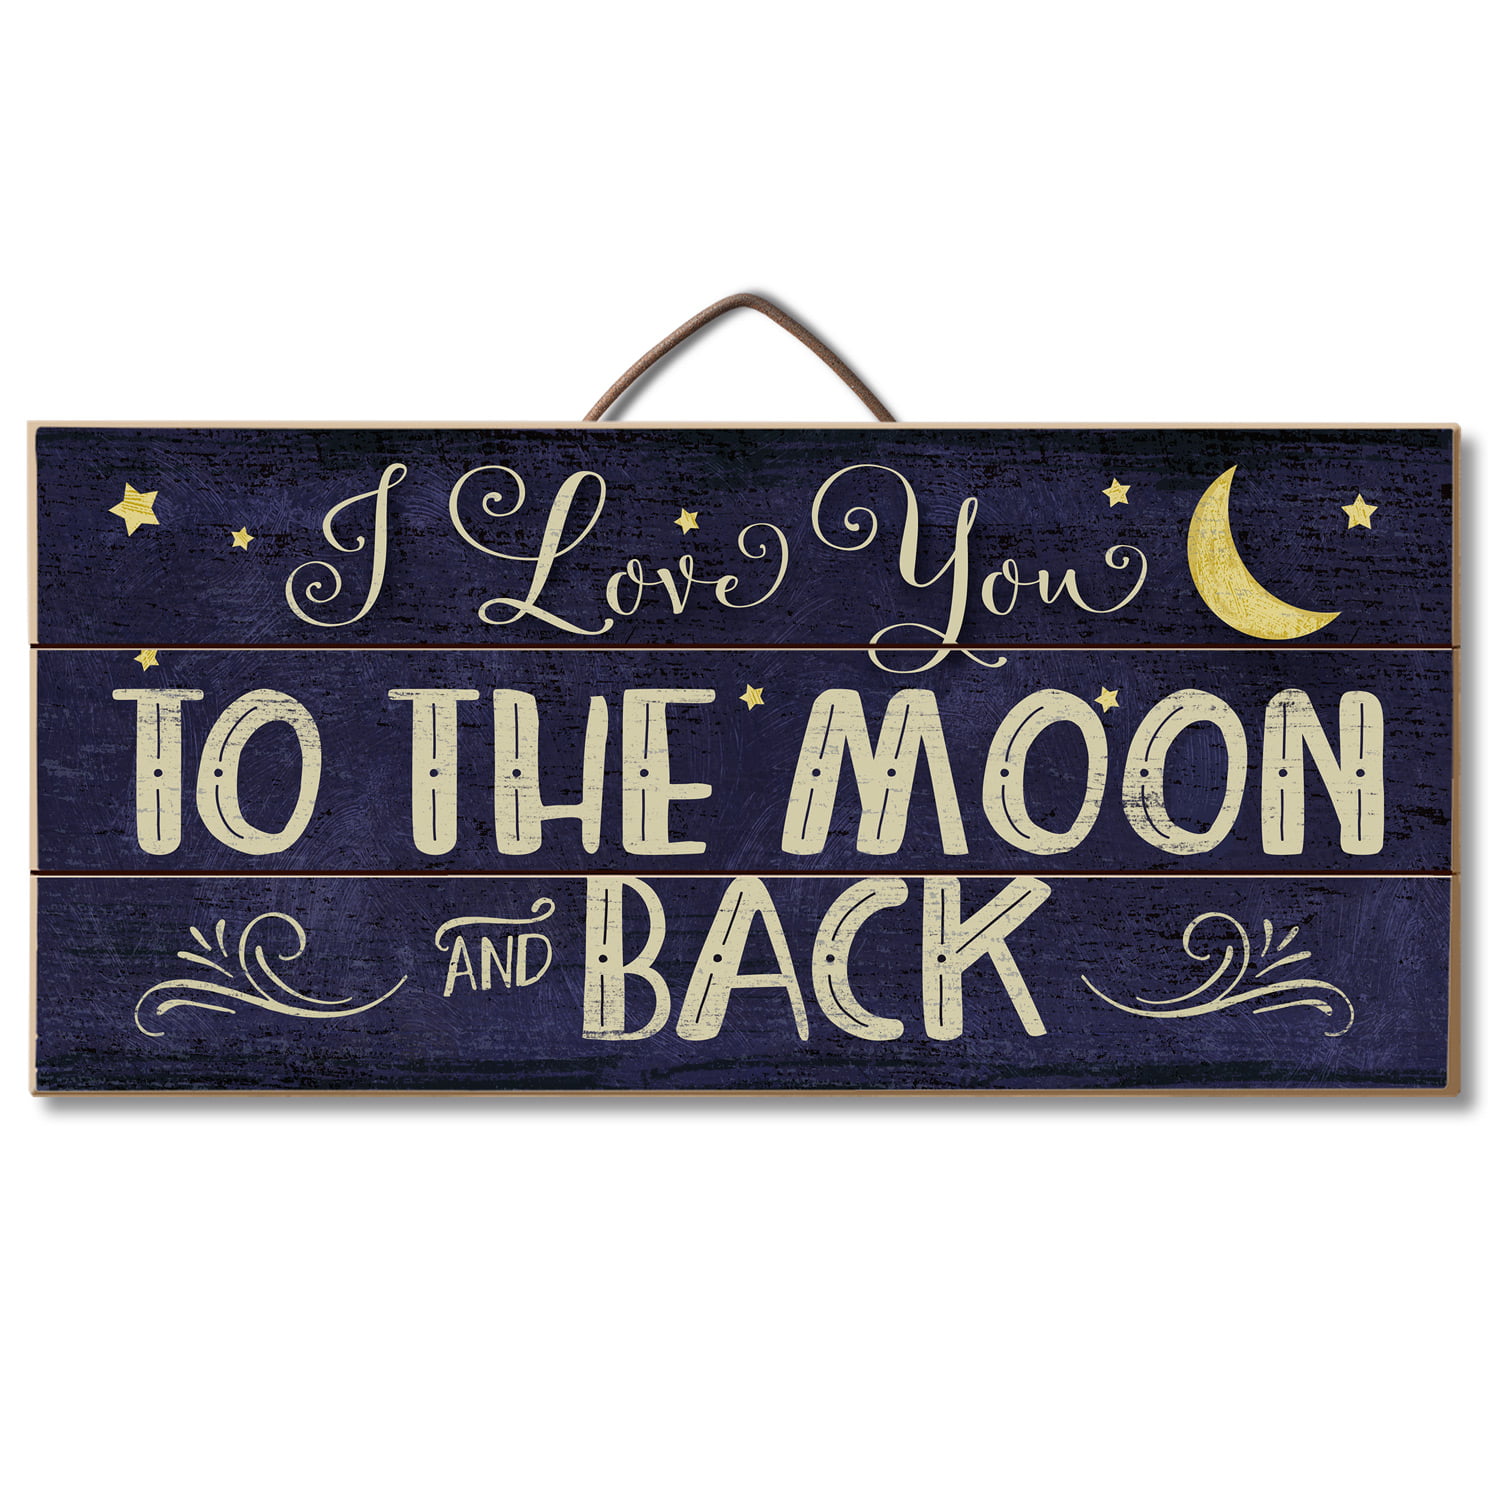 I Love You to the moon and back Decorative tile plaque sign saying quote 